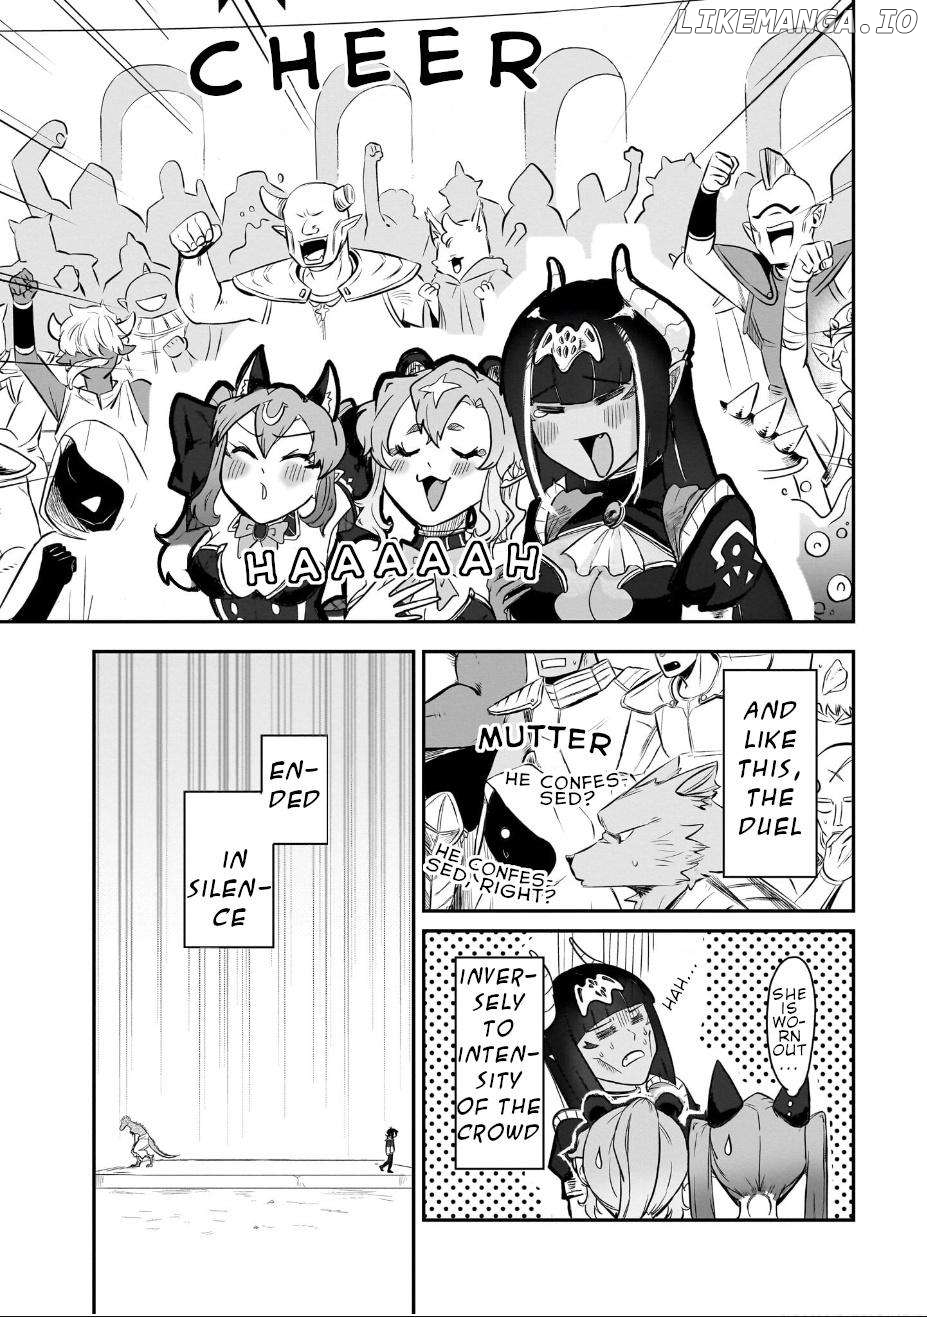 Even If I Was Reincarnated Into This Cruel World, My Cuteness Will Save Everyone! Chapter 11 - page 23